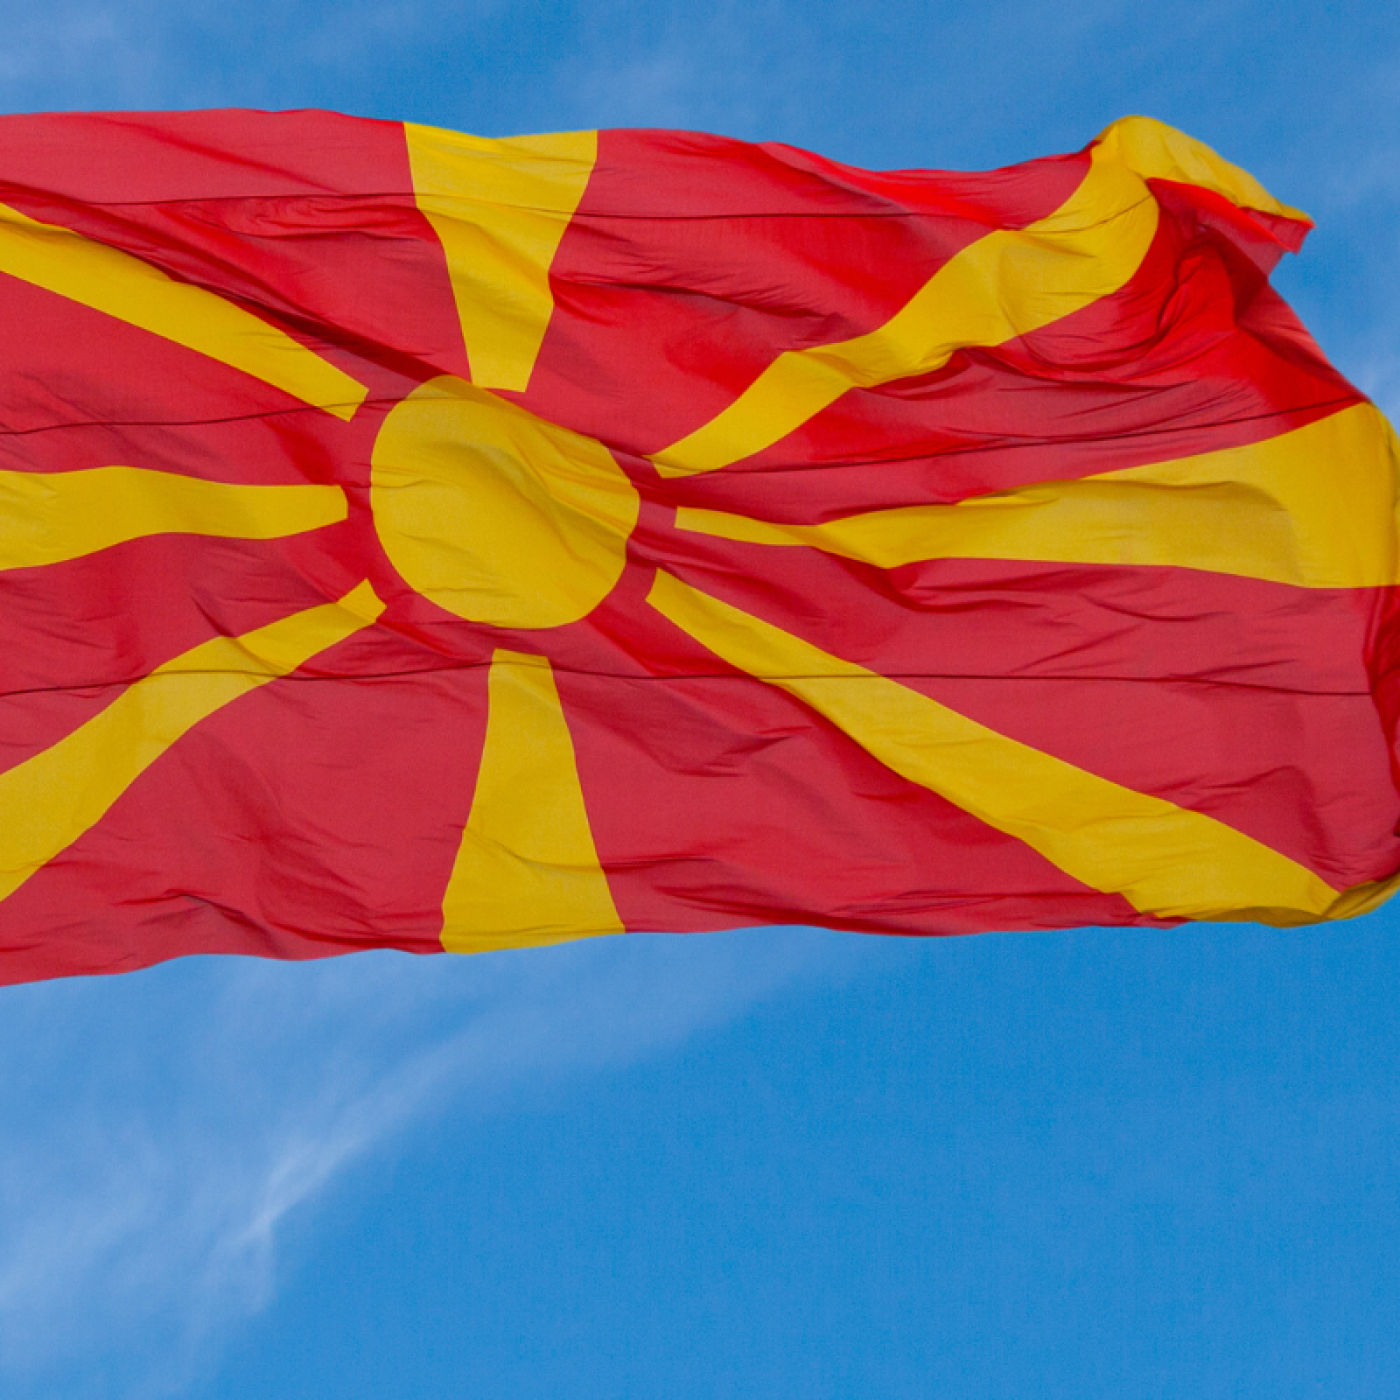 Flag of North Macedonia flying in blue sky.